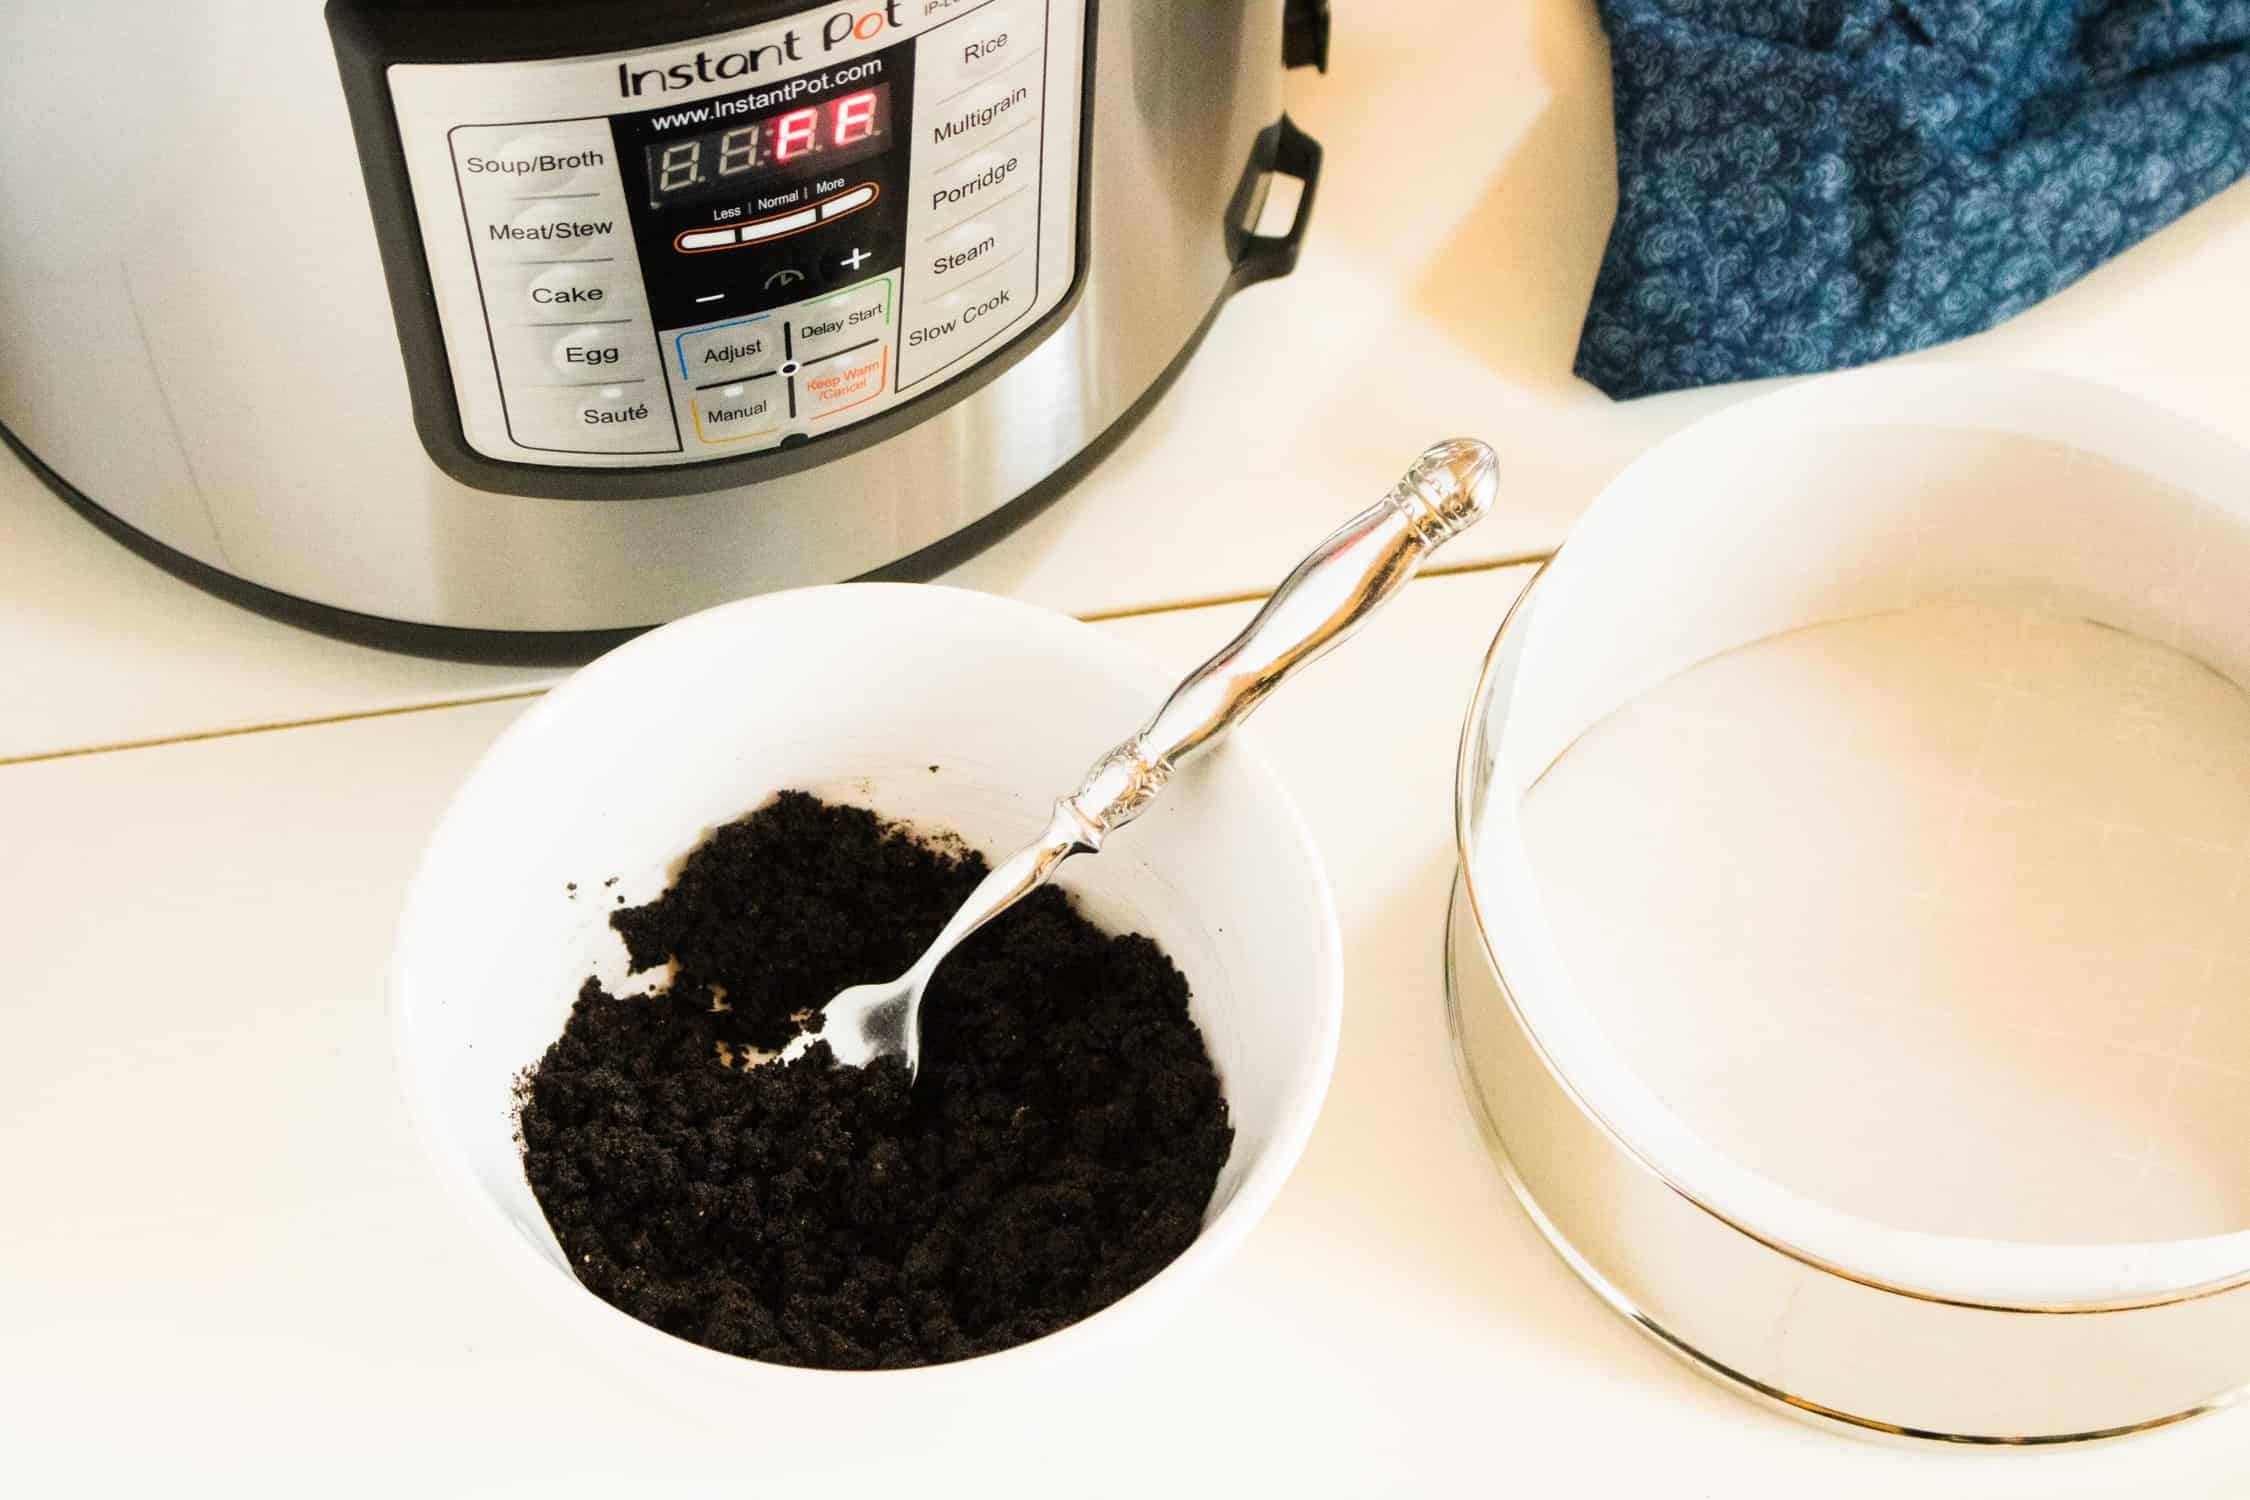 oreo cookie crumbs in a white bowl on a table next to a springform pan and an Instant Pot